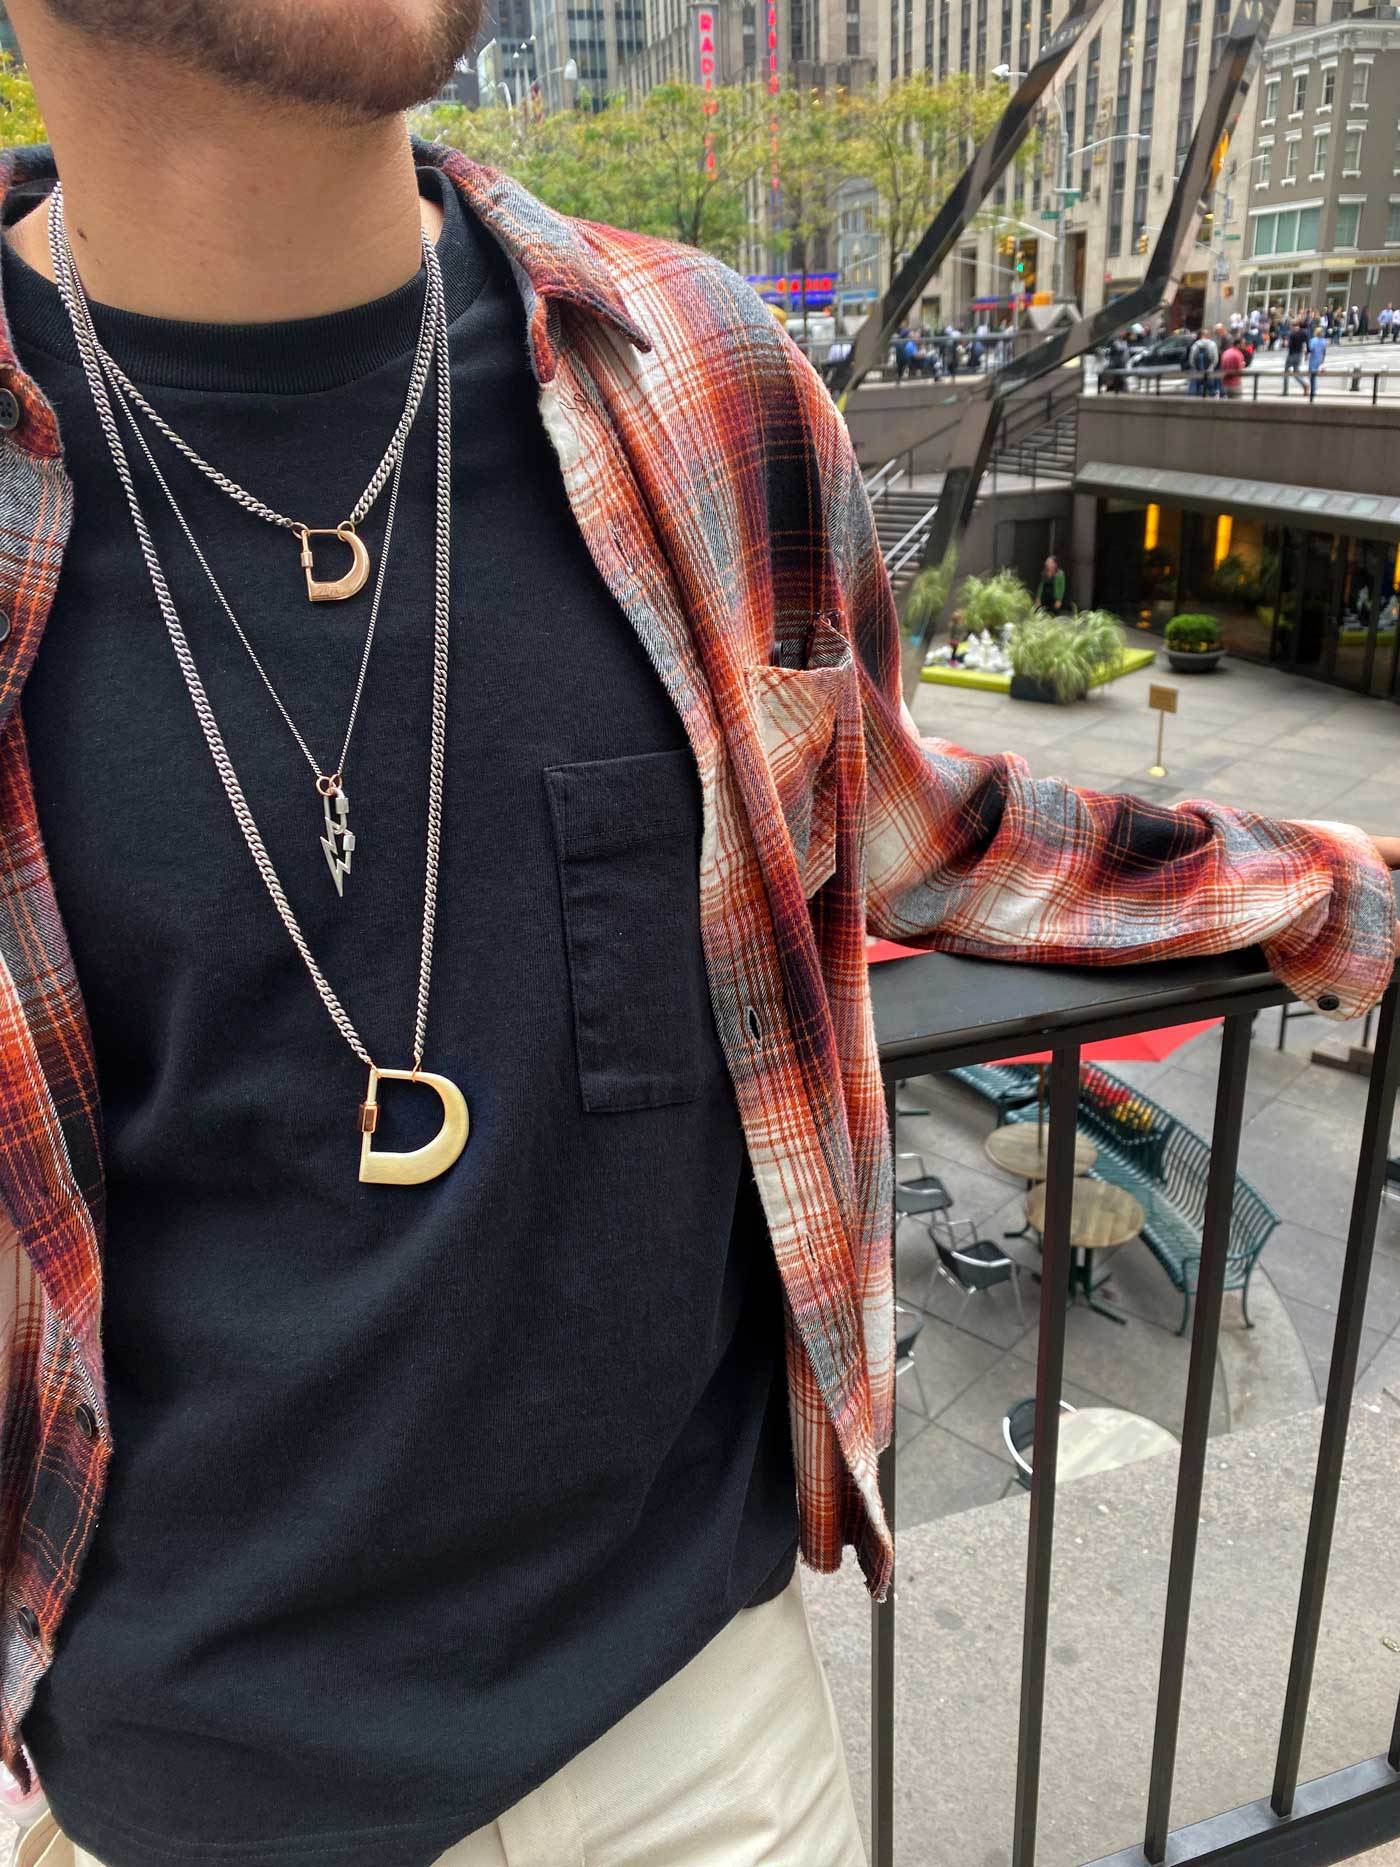 Man wearing necklace with D lock